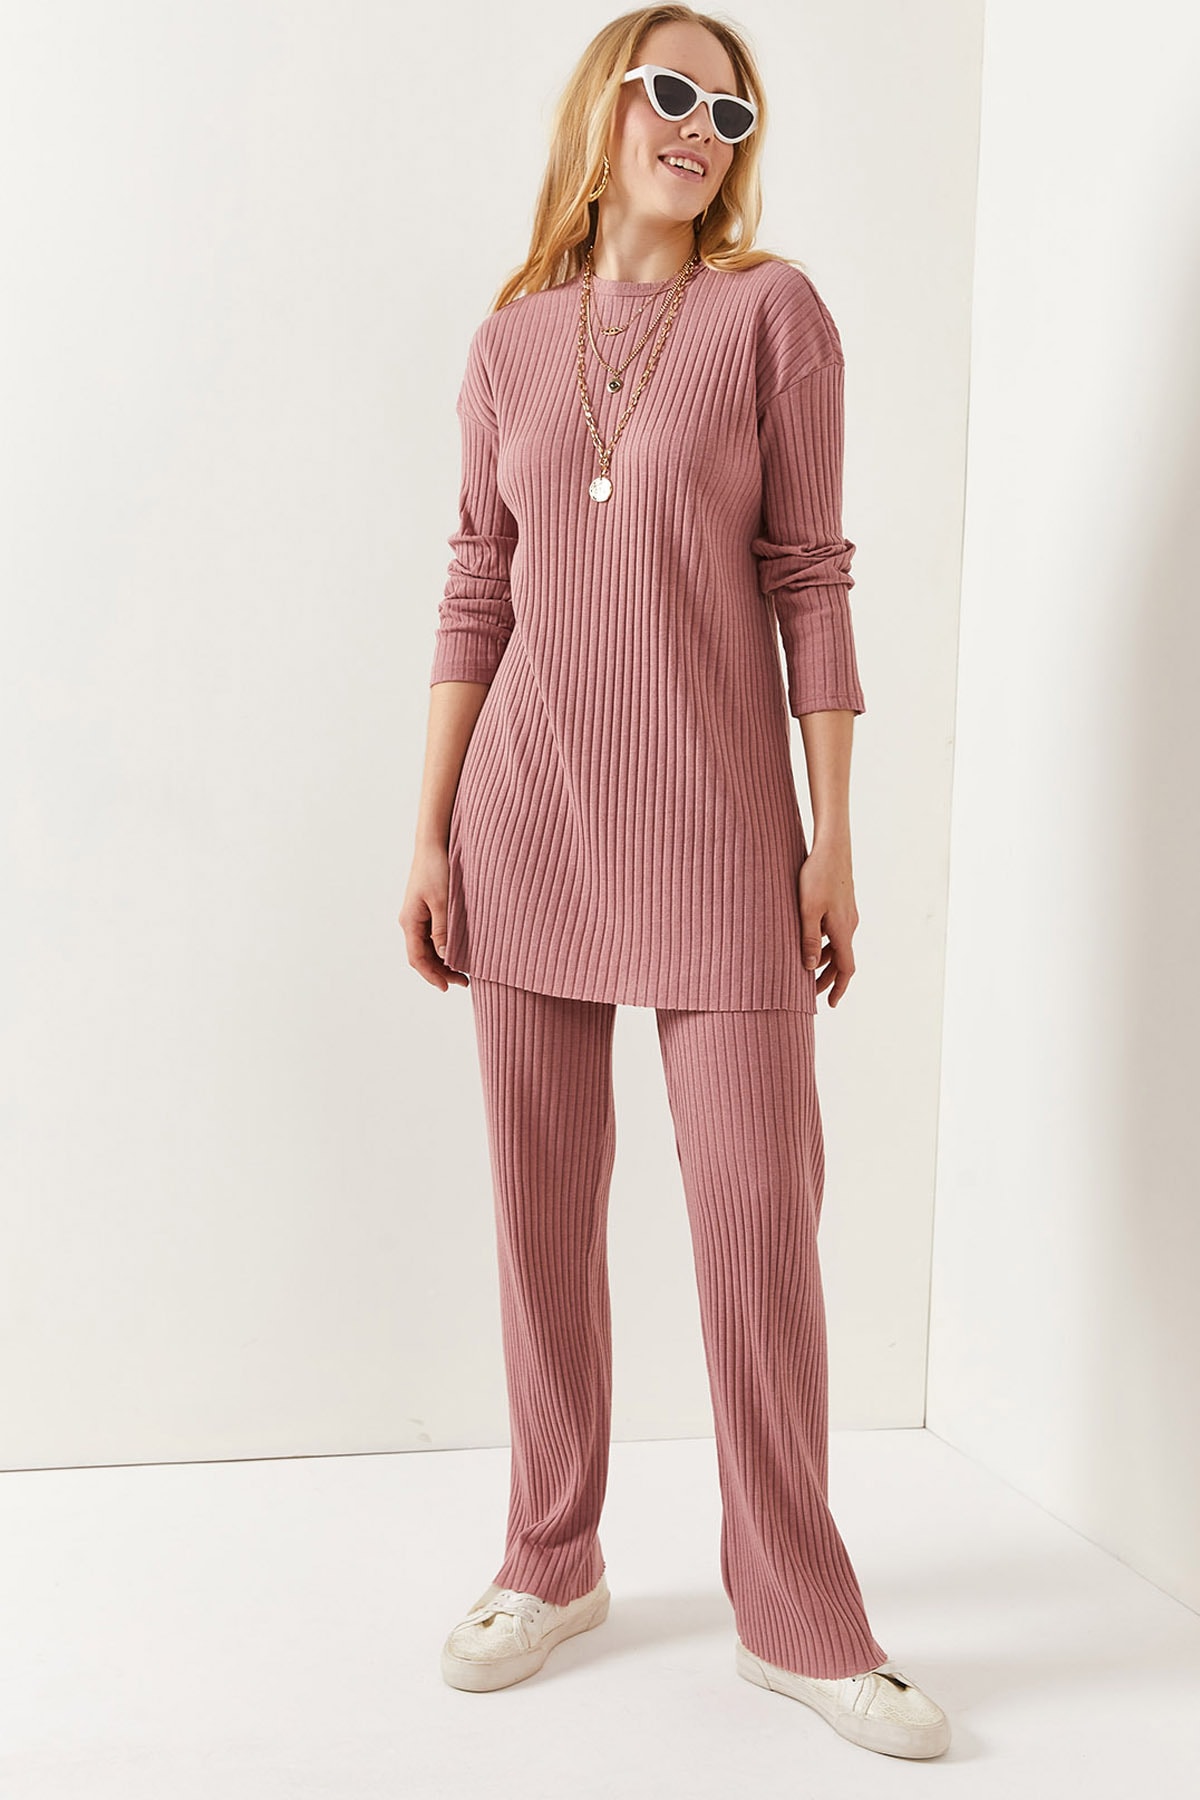 Levně Olalook Women's Dried Rose Top with a slit blouse Bottom Palazzo Corduroy Suit